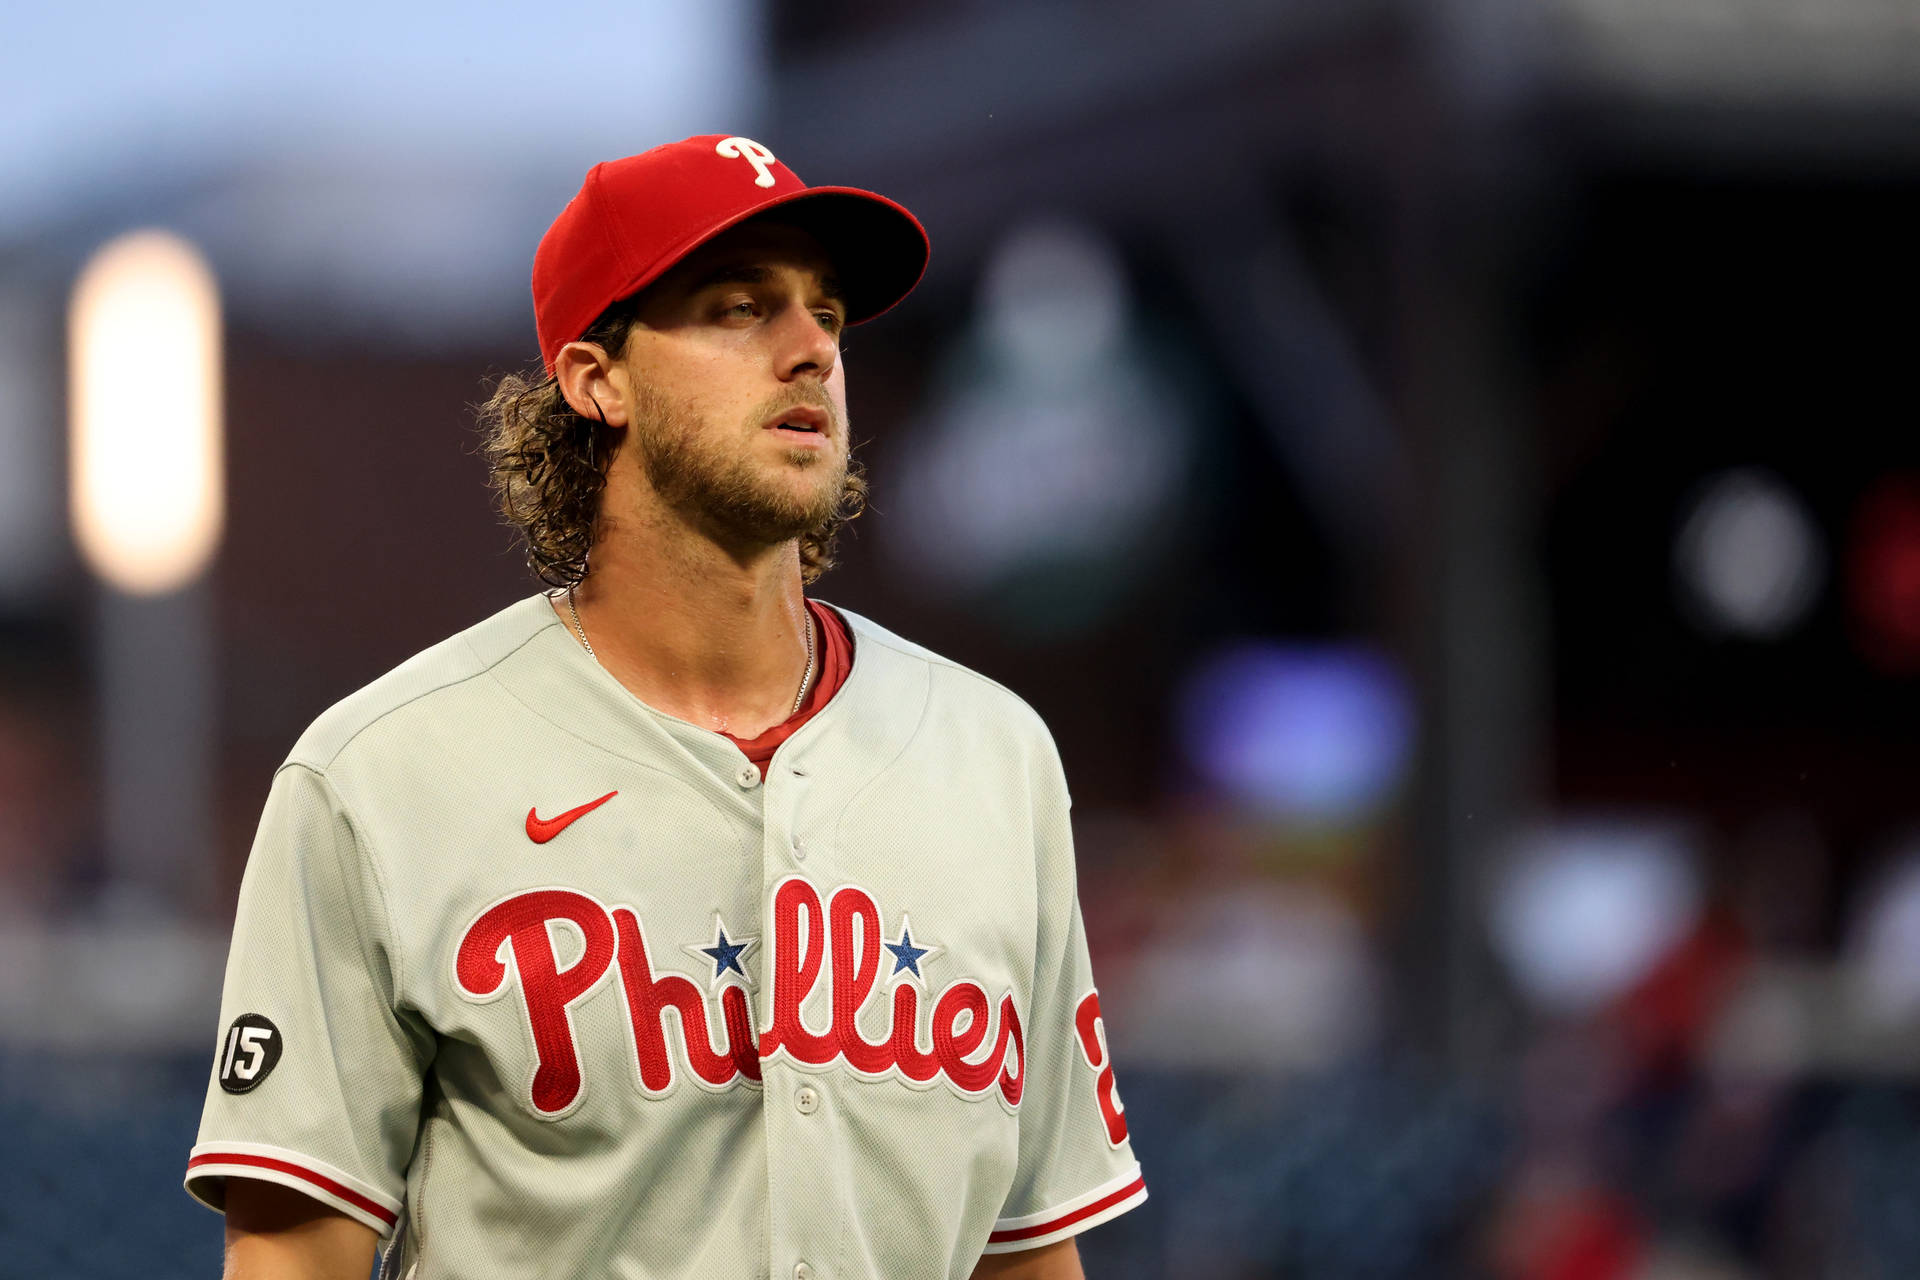 Aaronnola Sigh Can Be Translated To Spanish As 